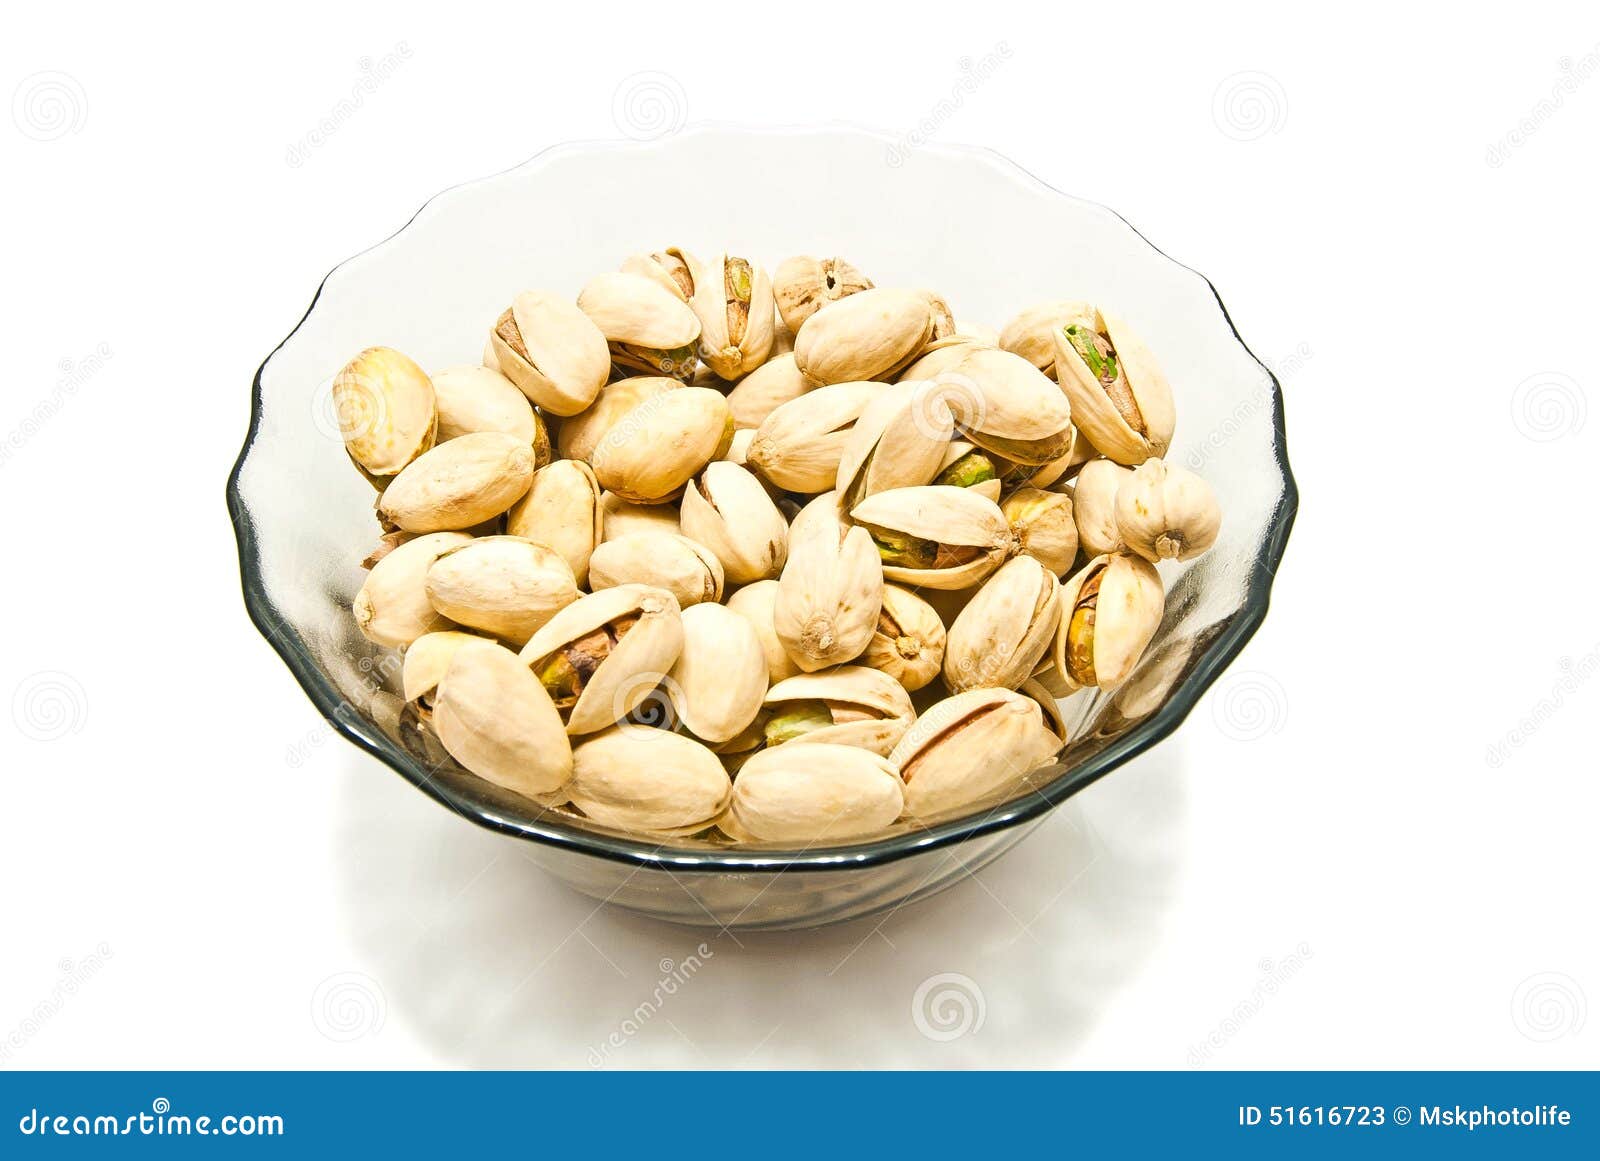 dish with roasted pistachios